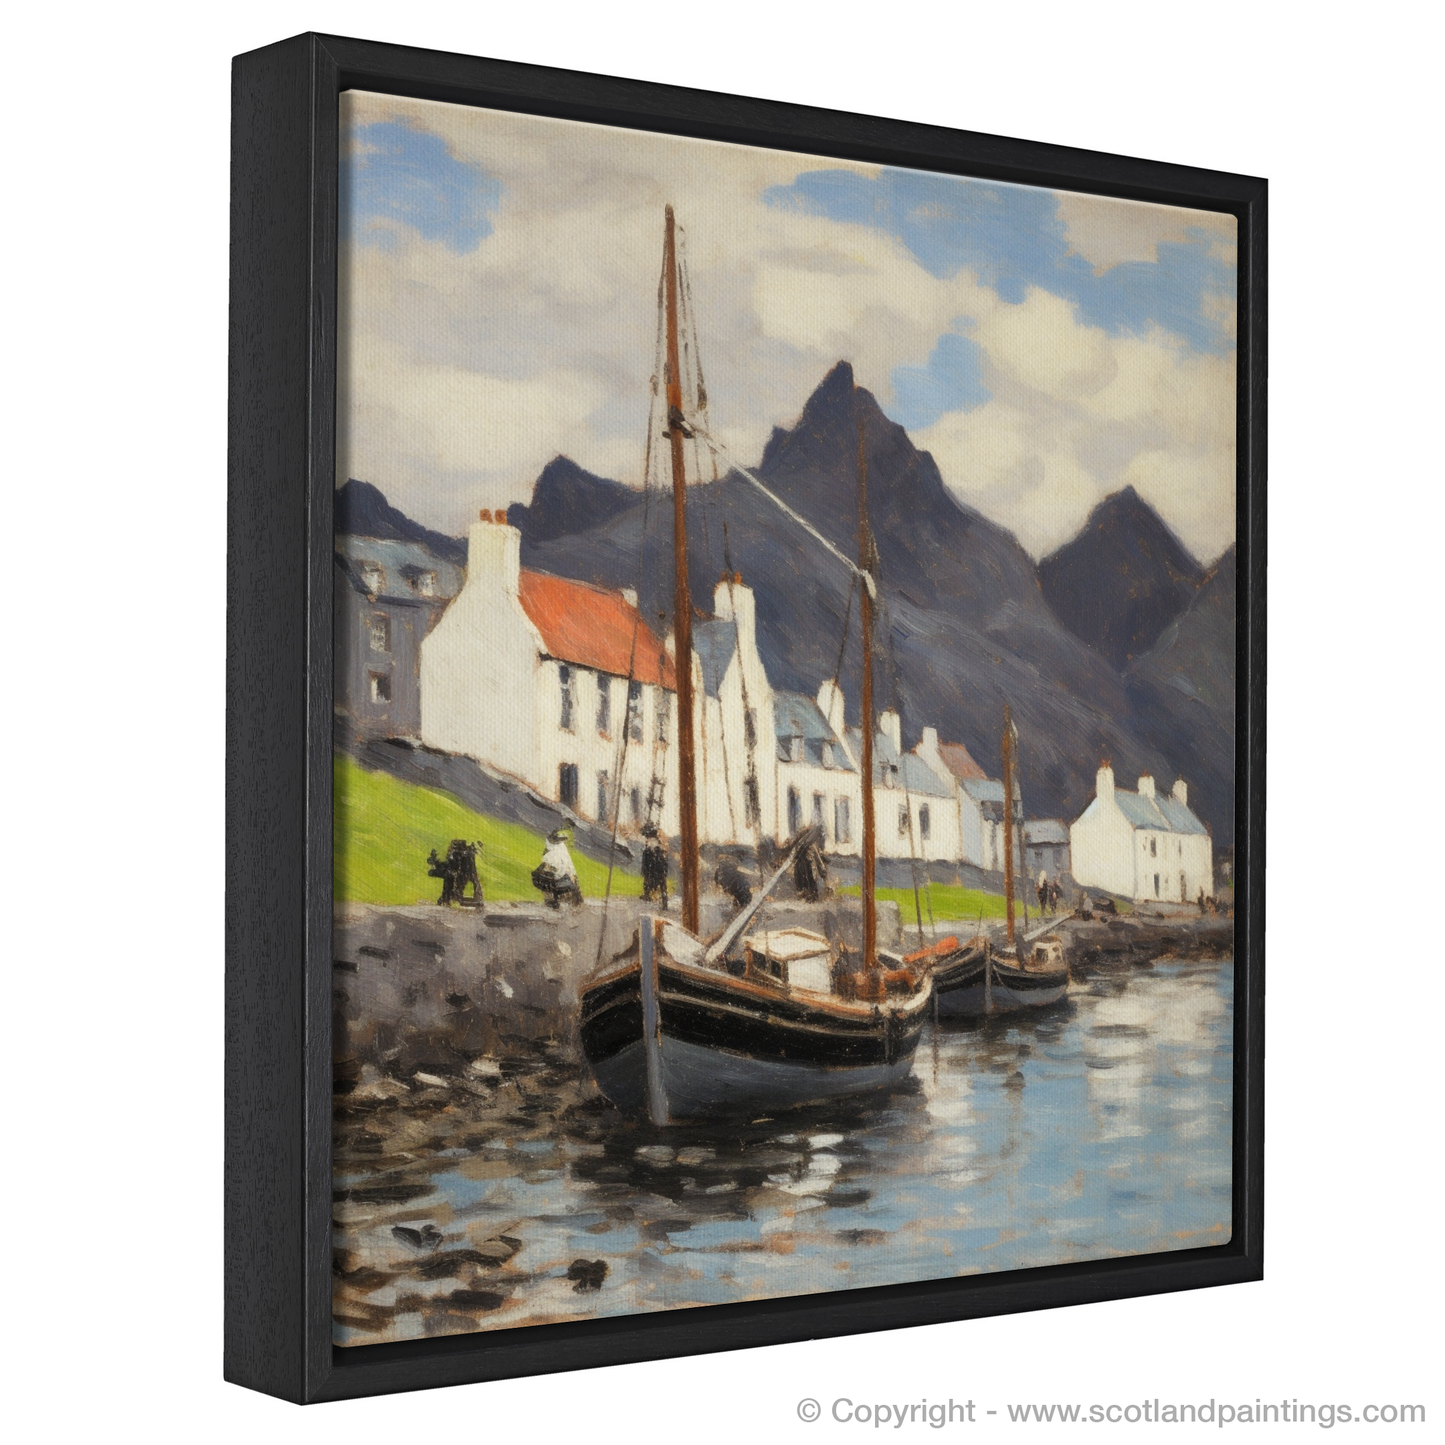 Harbour Serenity: An Impression of Portree Isle